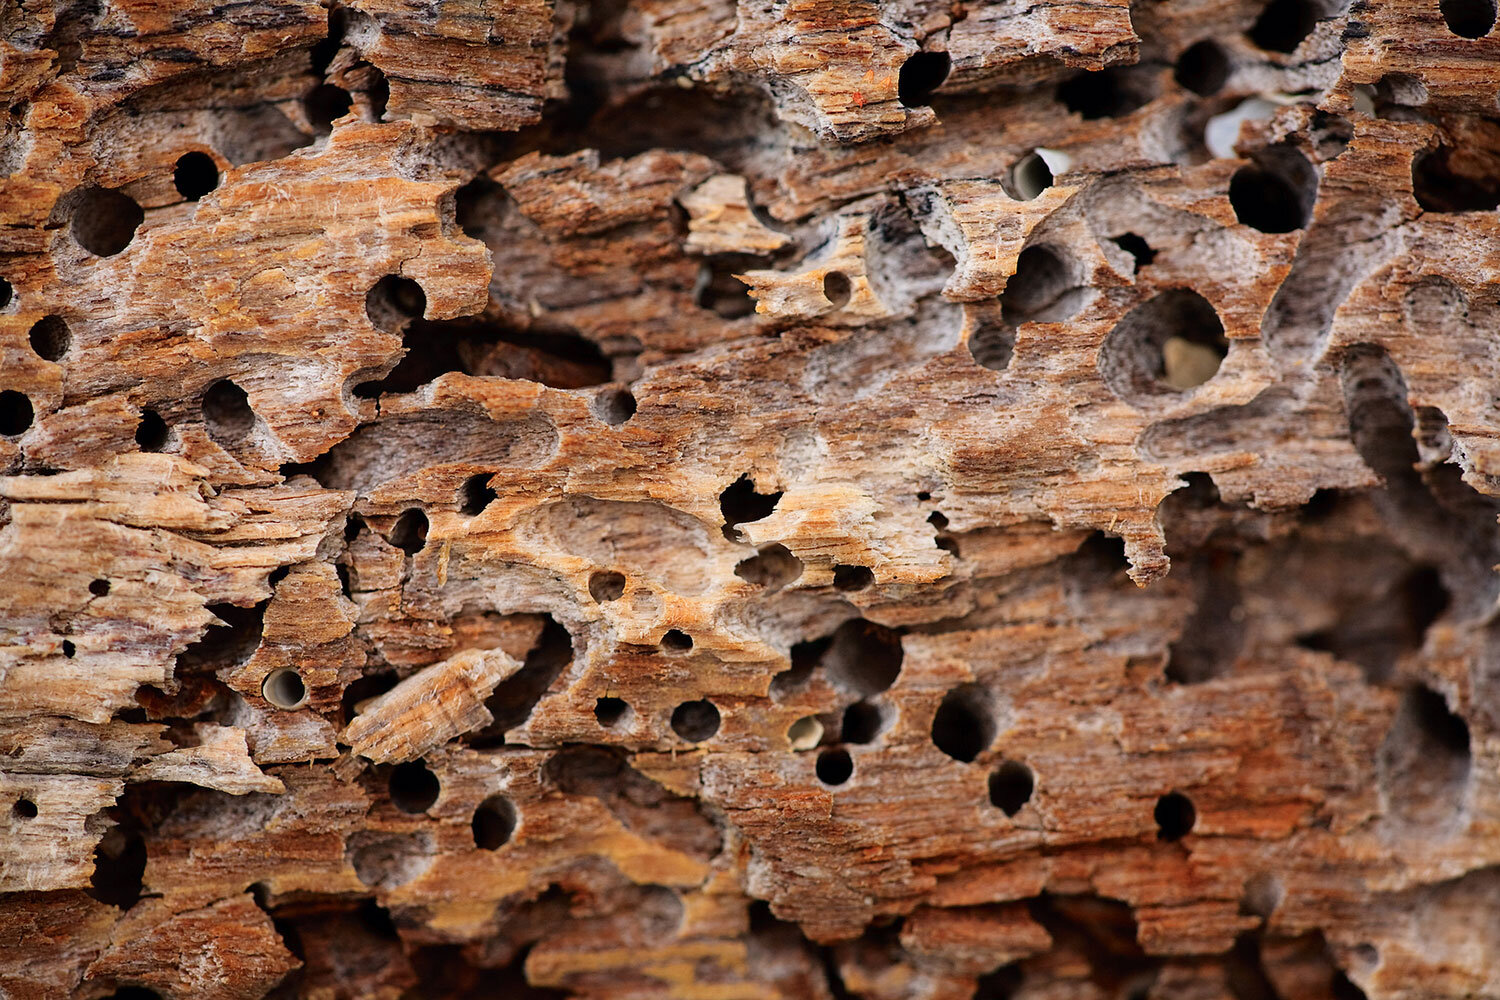 What You Should Know About Termite Damage.